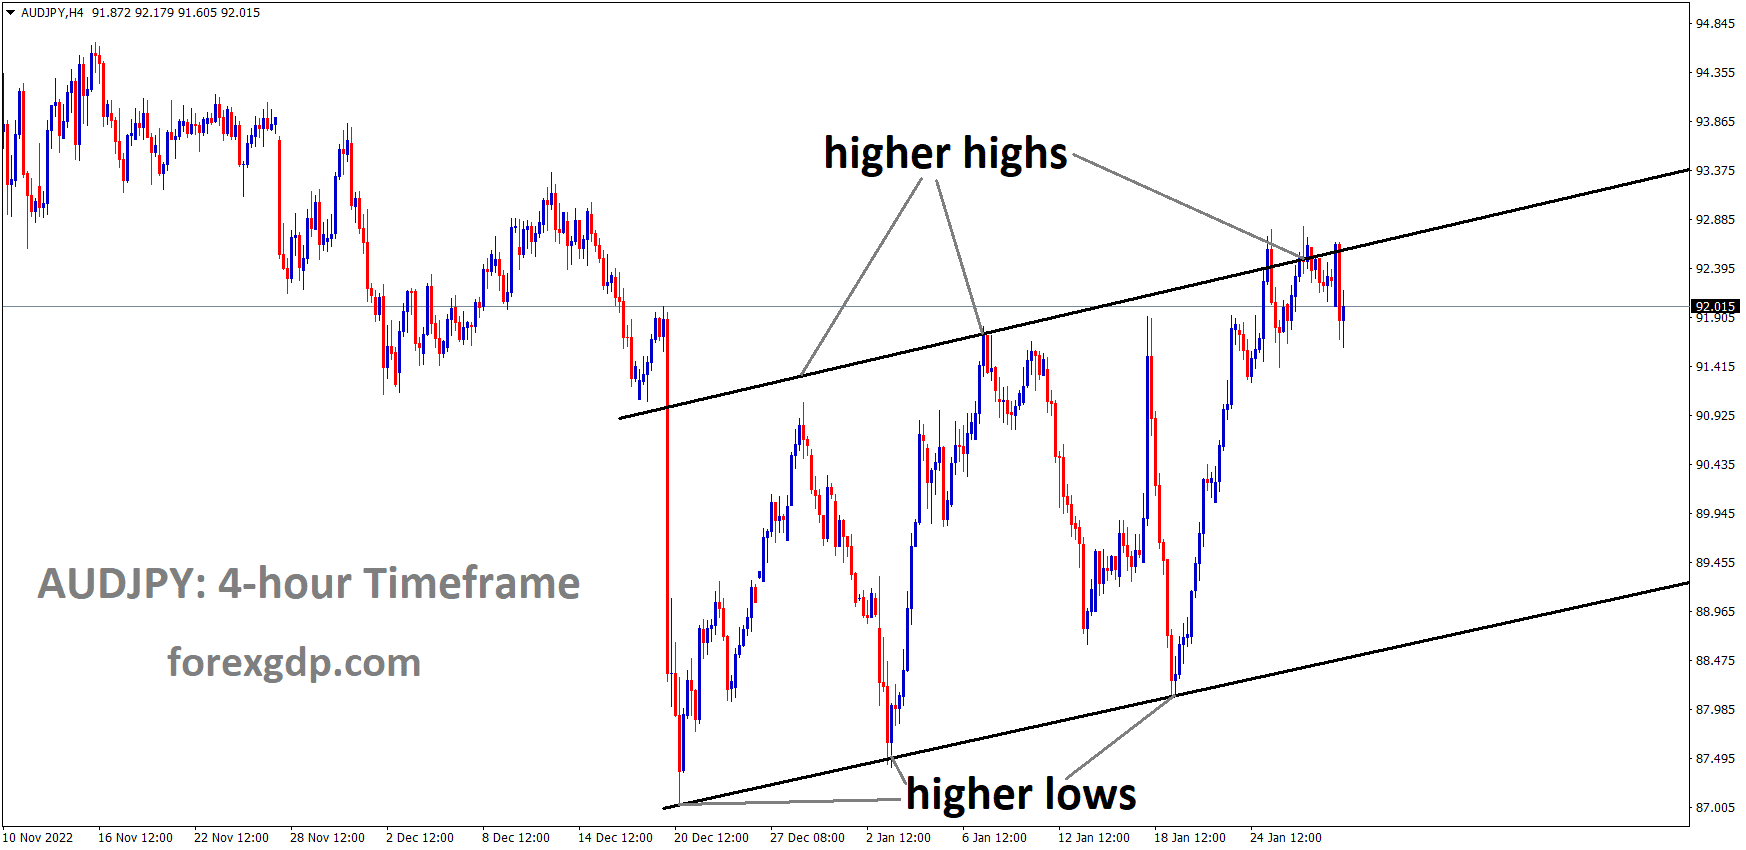 AUDJPY is moving in an Ascending channel and the market has fallen from the higher high area of the channel 1